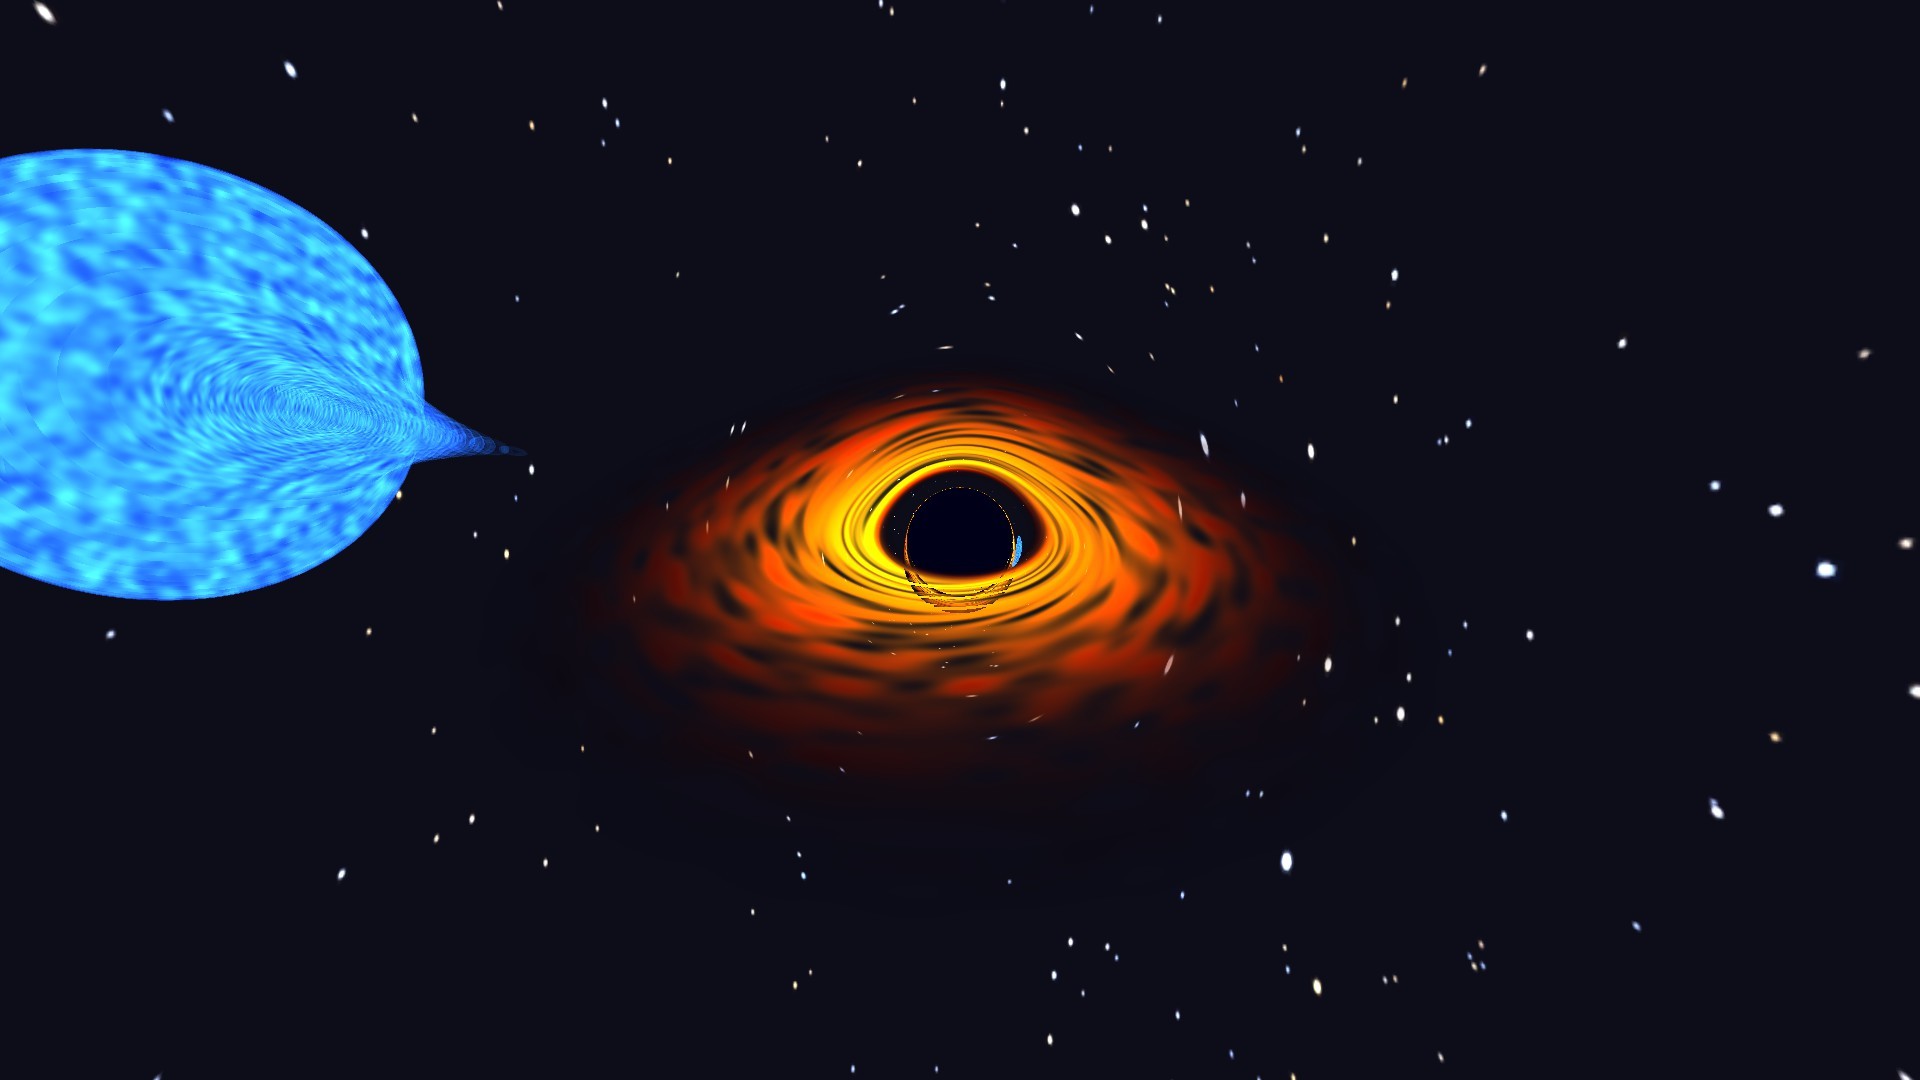 going into a black hole simulation